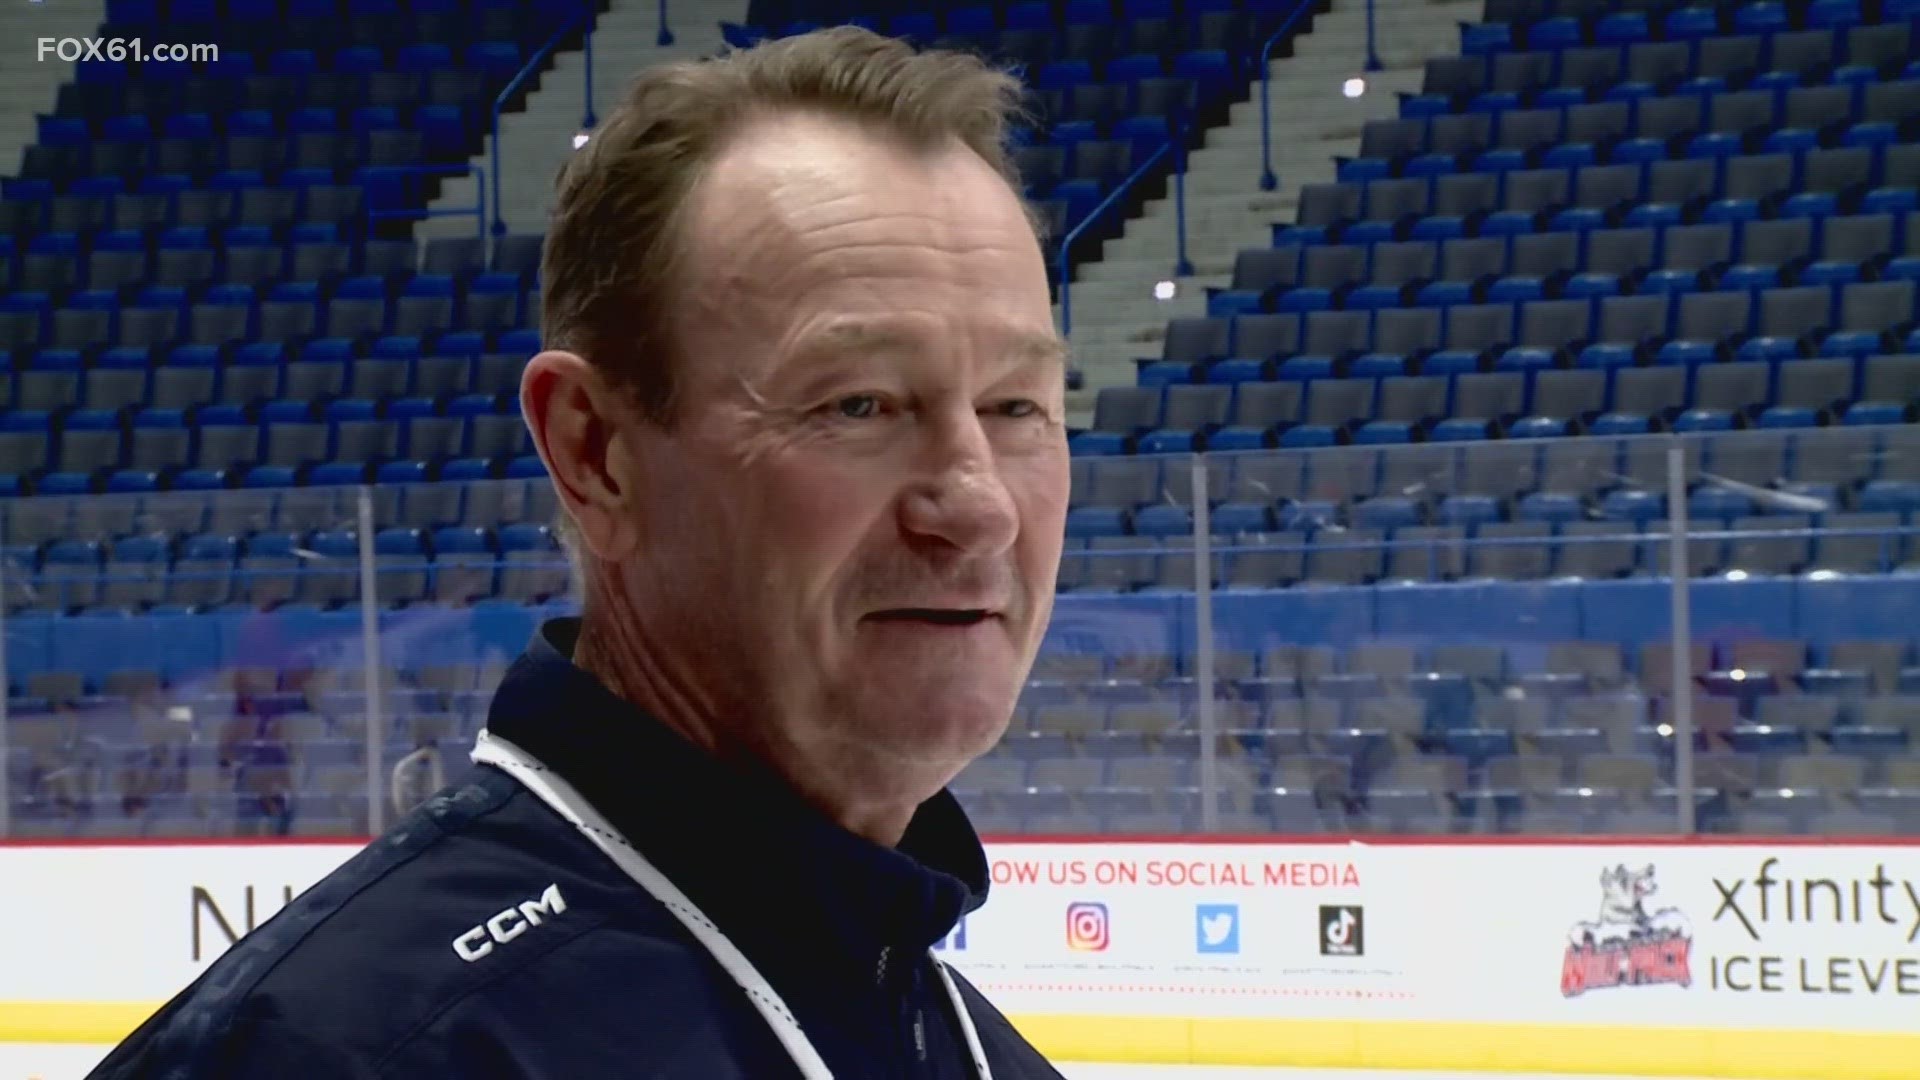 The Hartford Wolf Pack have clinched a playoff spot, a tremendous accomplishment for Head Coach Steve Smith, who took over in the middle of the season.